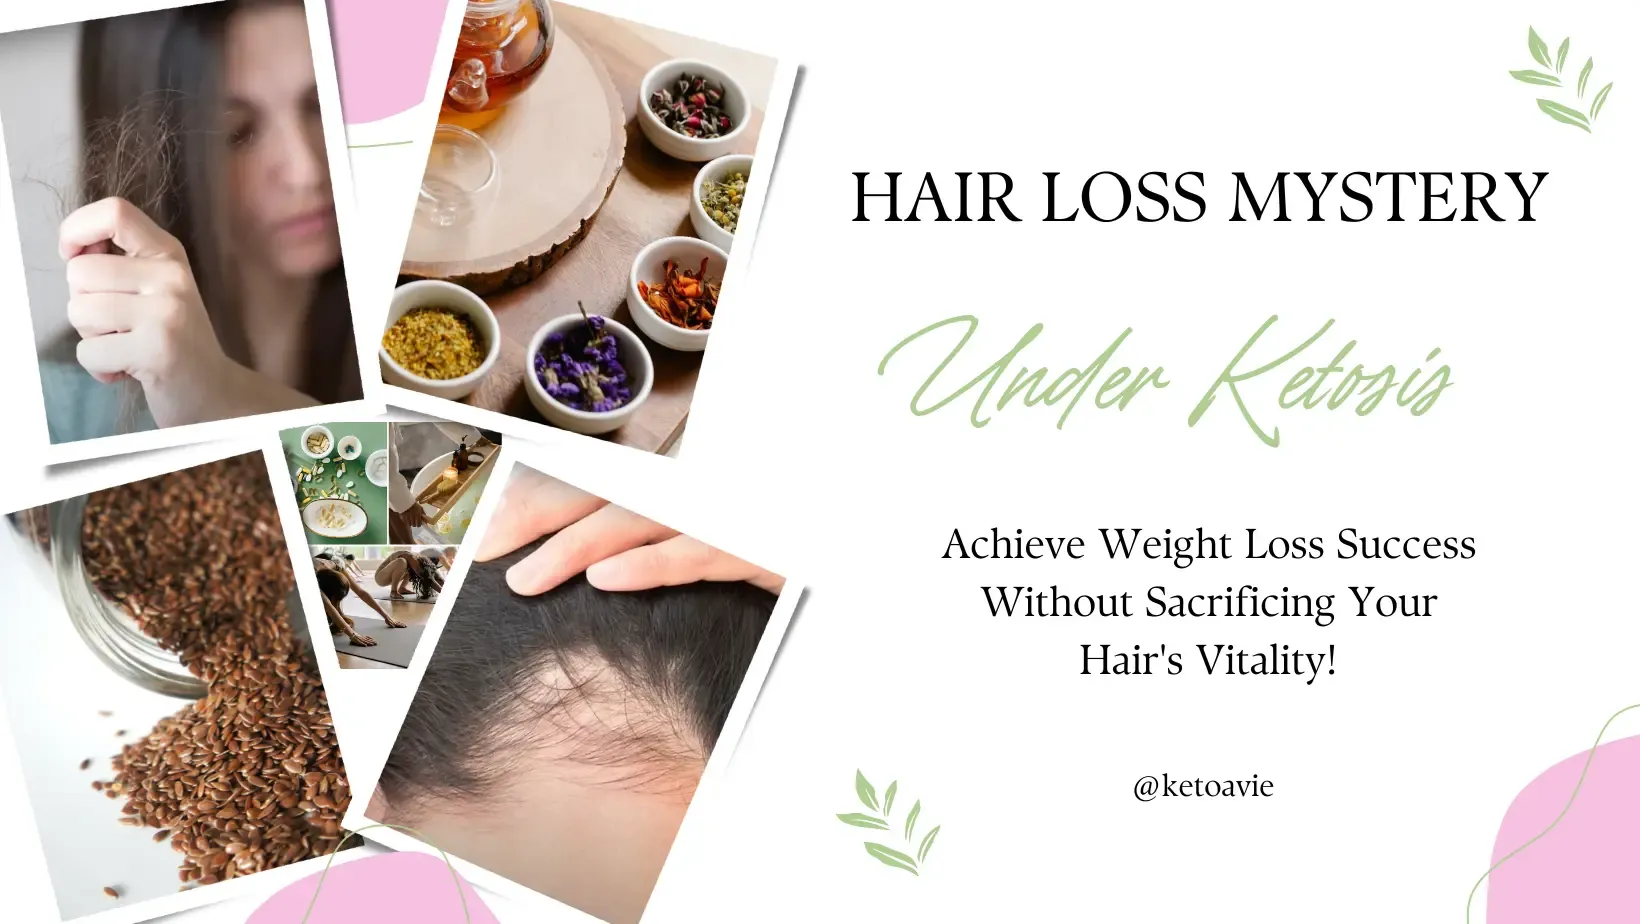 Solving the Hair Loss Mystery on a Ketogenic Diet